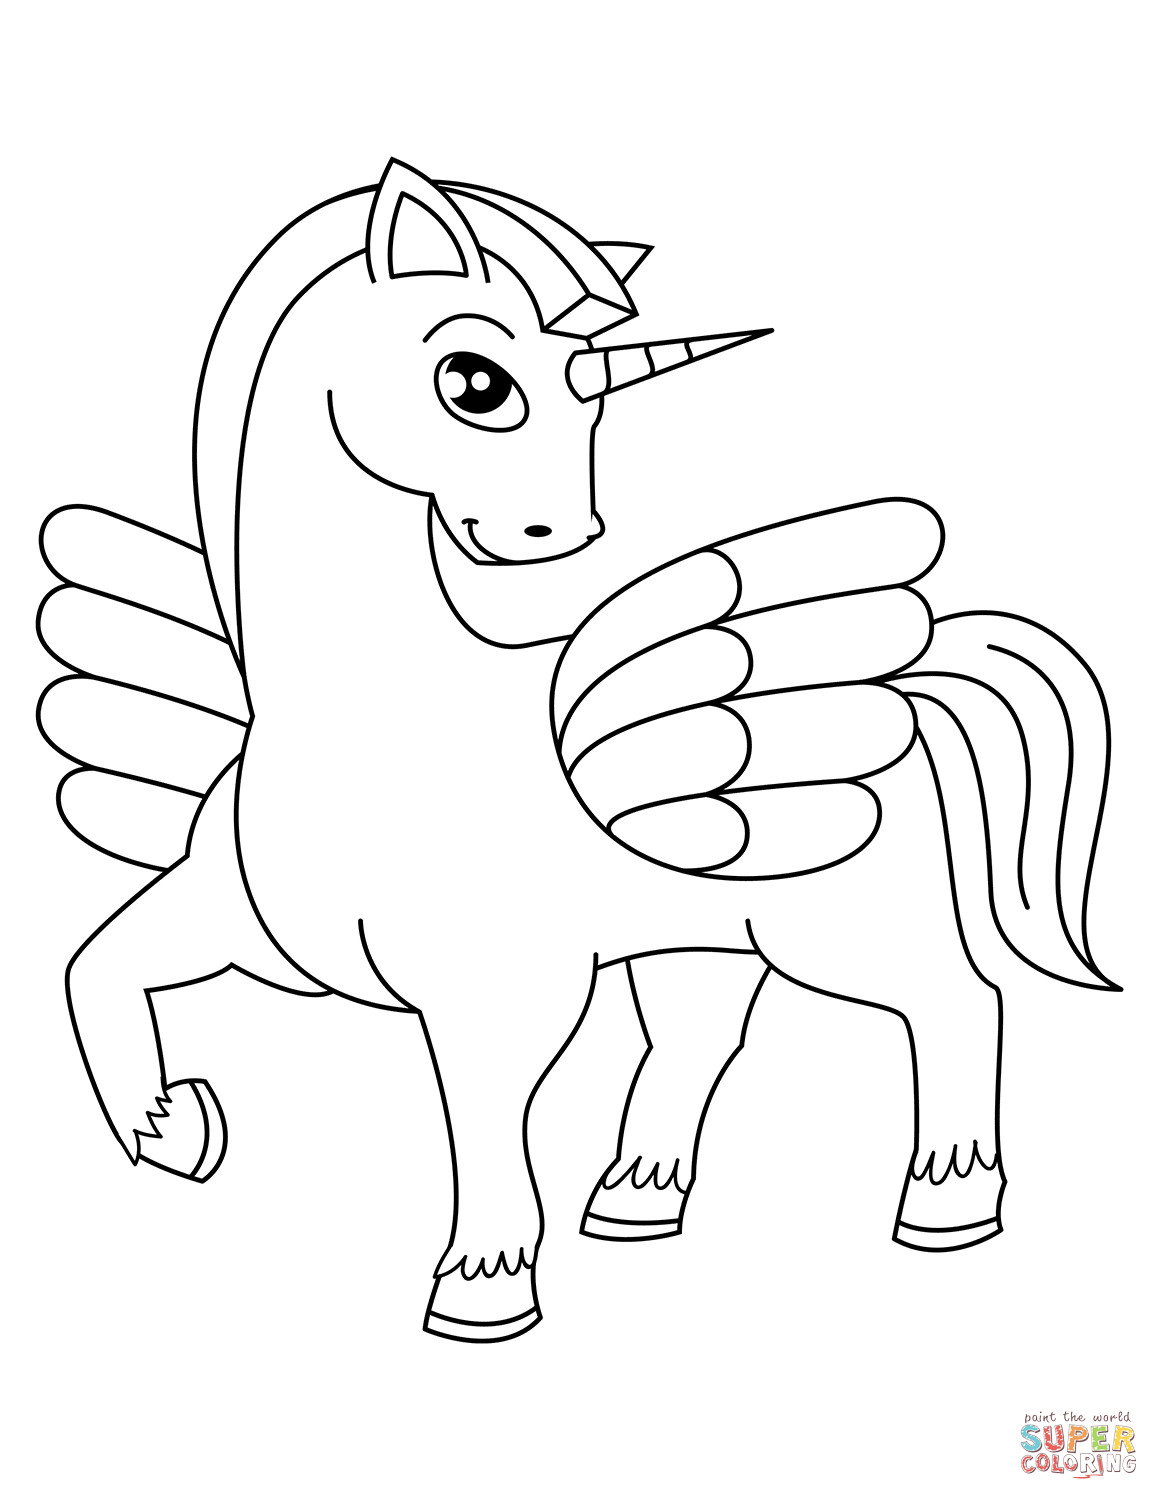 Unicorn Girl Coloring Pages
 Cute Winged Unicorn coloring page